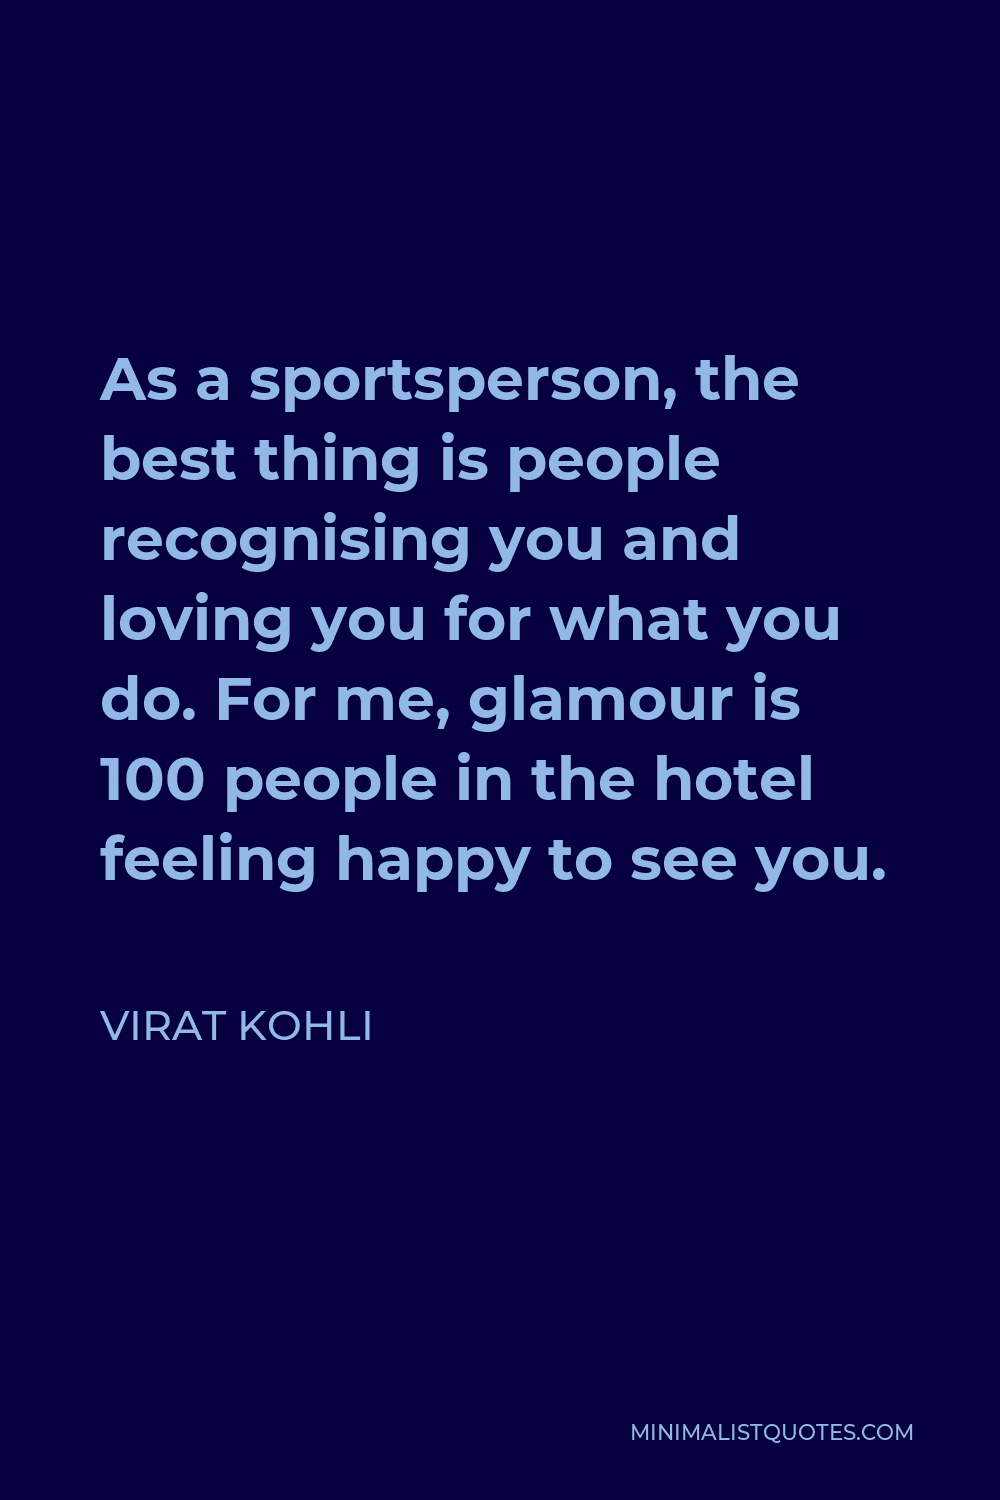 Virat Kohli Quote - As a sportsperson, the best thing is people recognising you and loving you for what you do. For me, glamour is 100 people in the hotel feeling happy to see you.